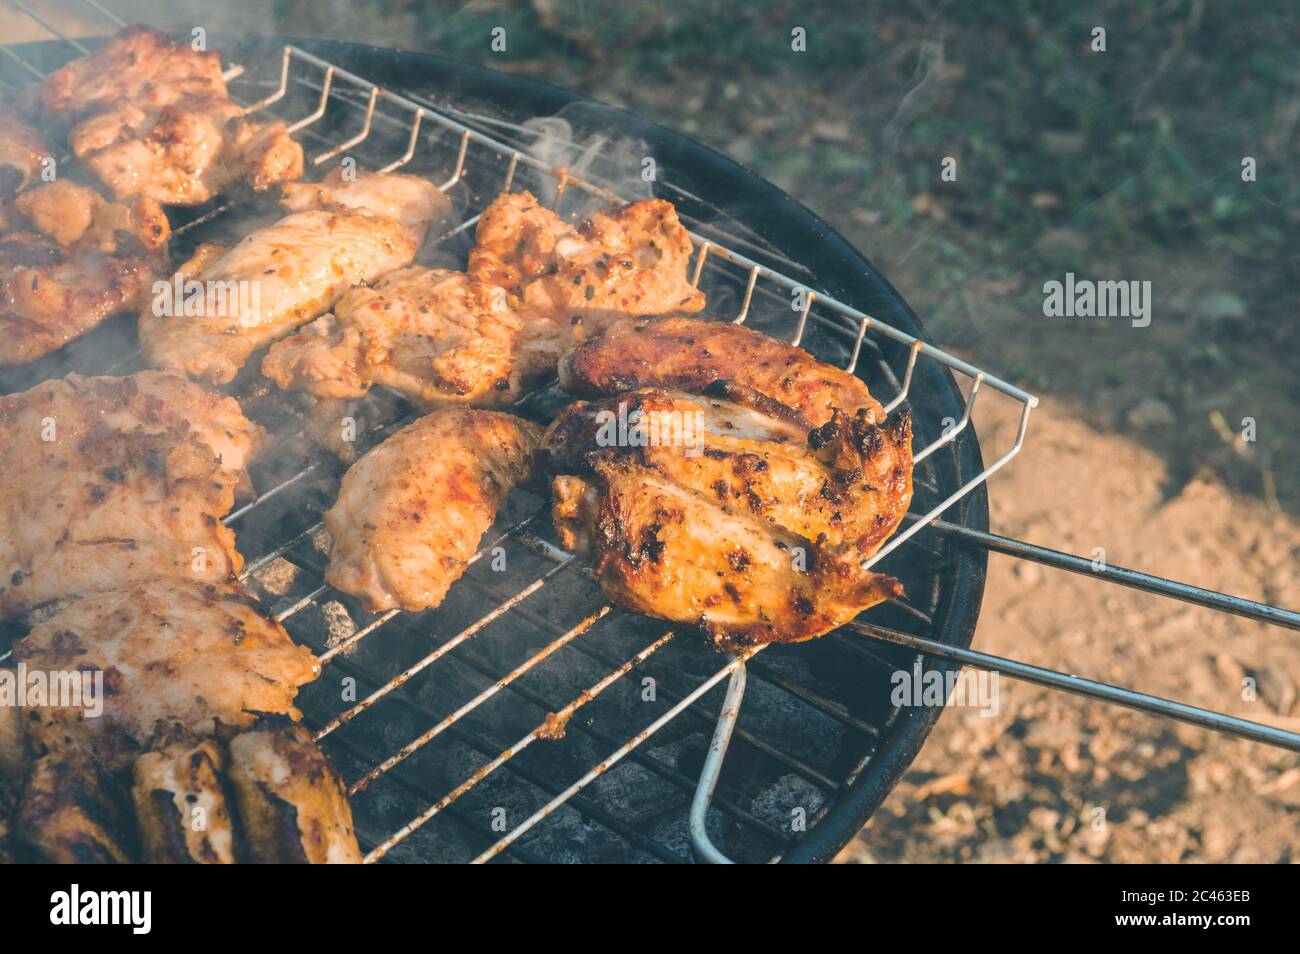 Close up of delicious and juicy chicken meat being cooked on a charcoal barbeque grill. Tasty snack party. Stock Photo